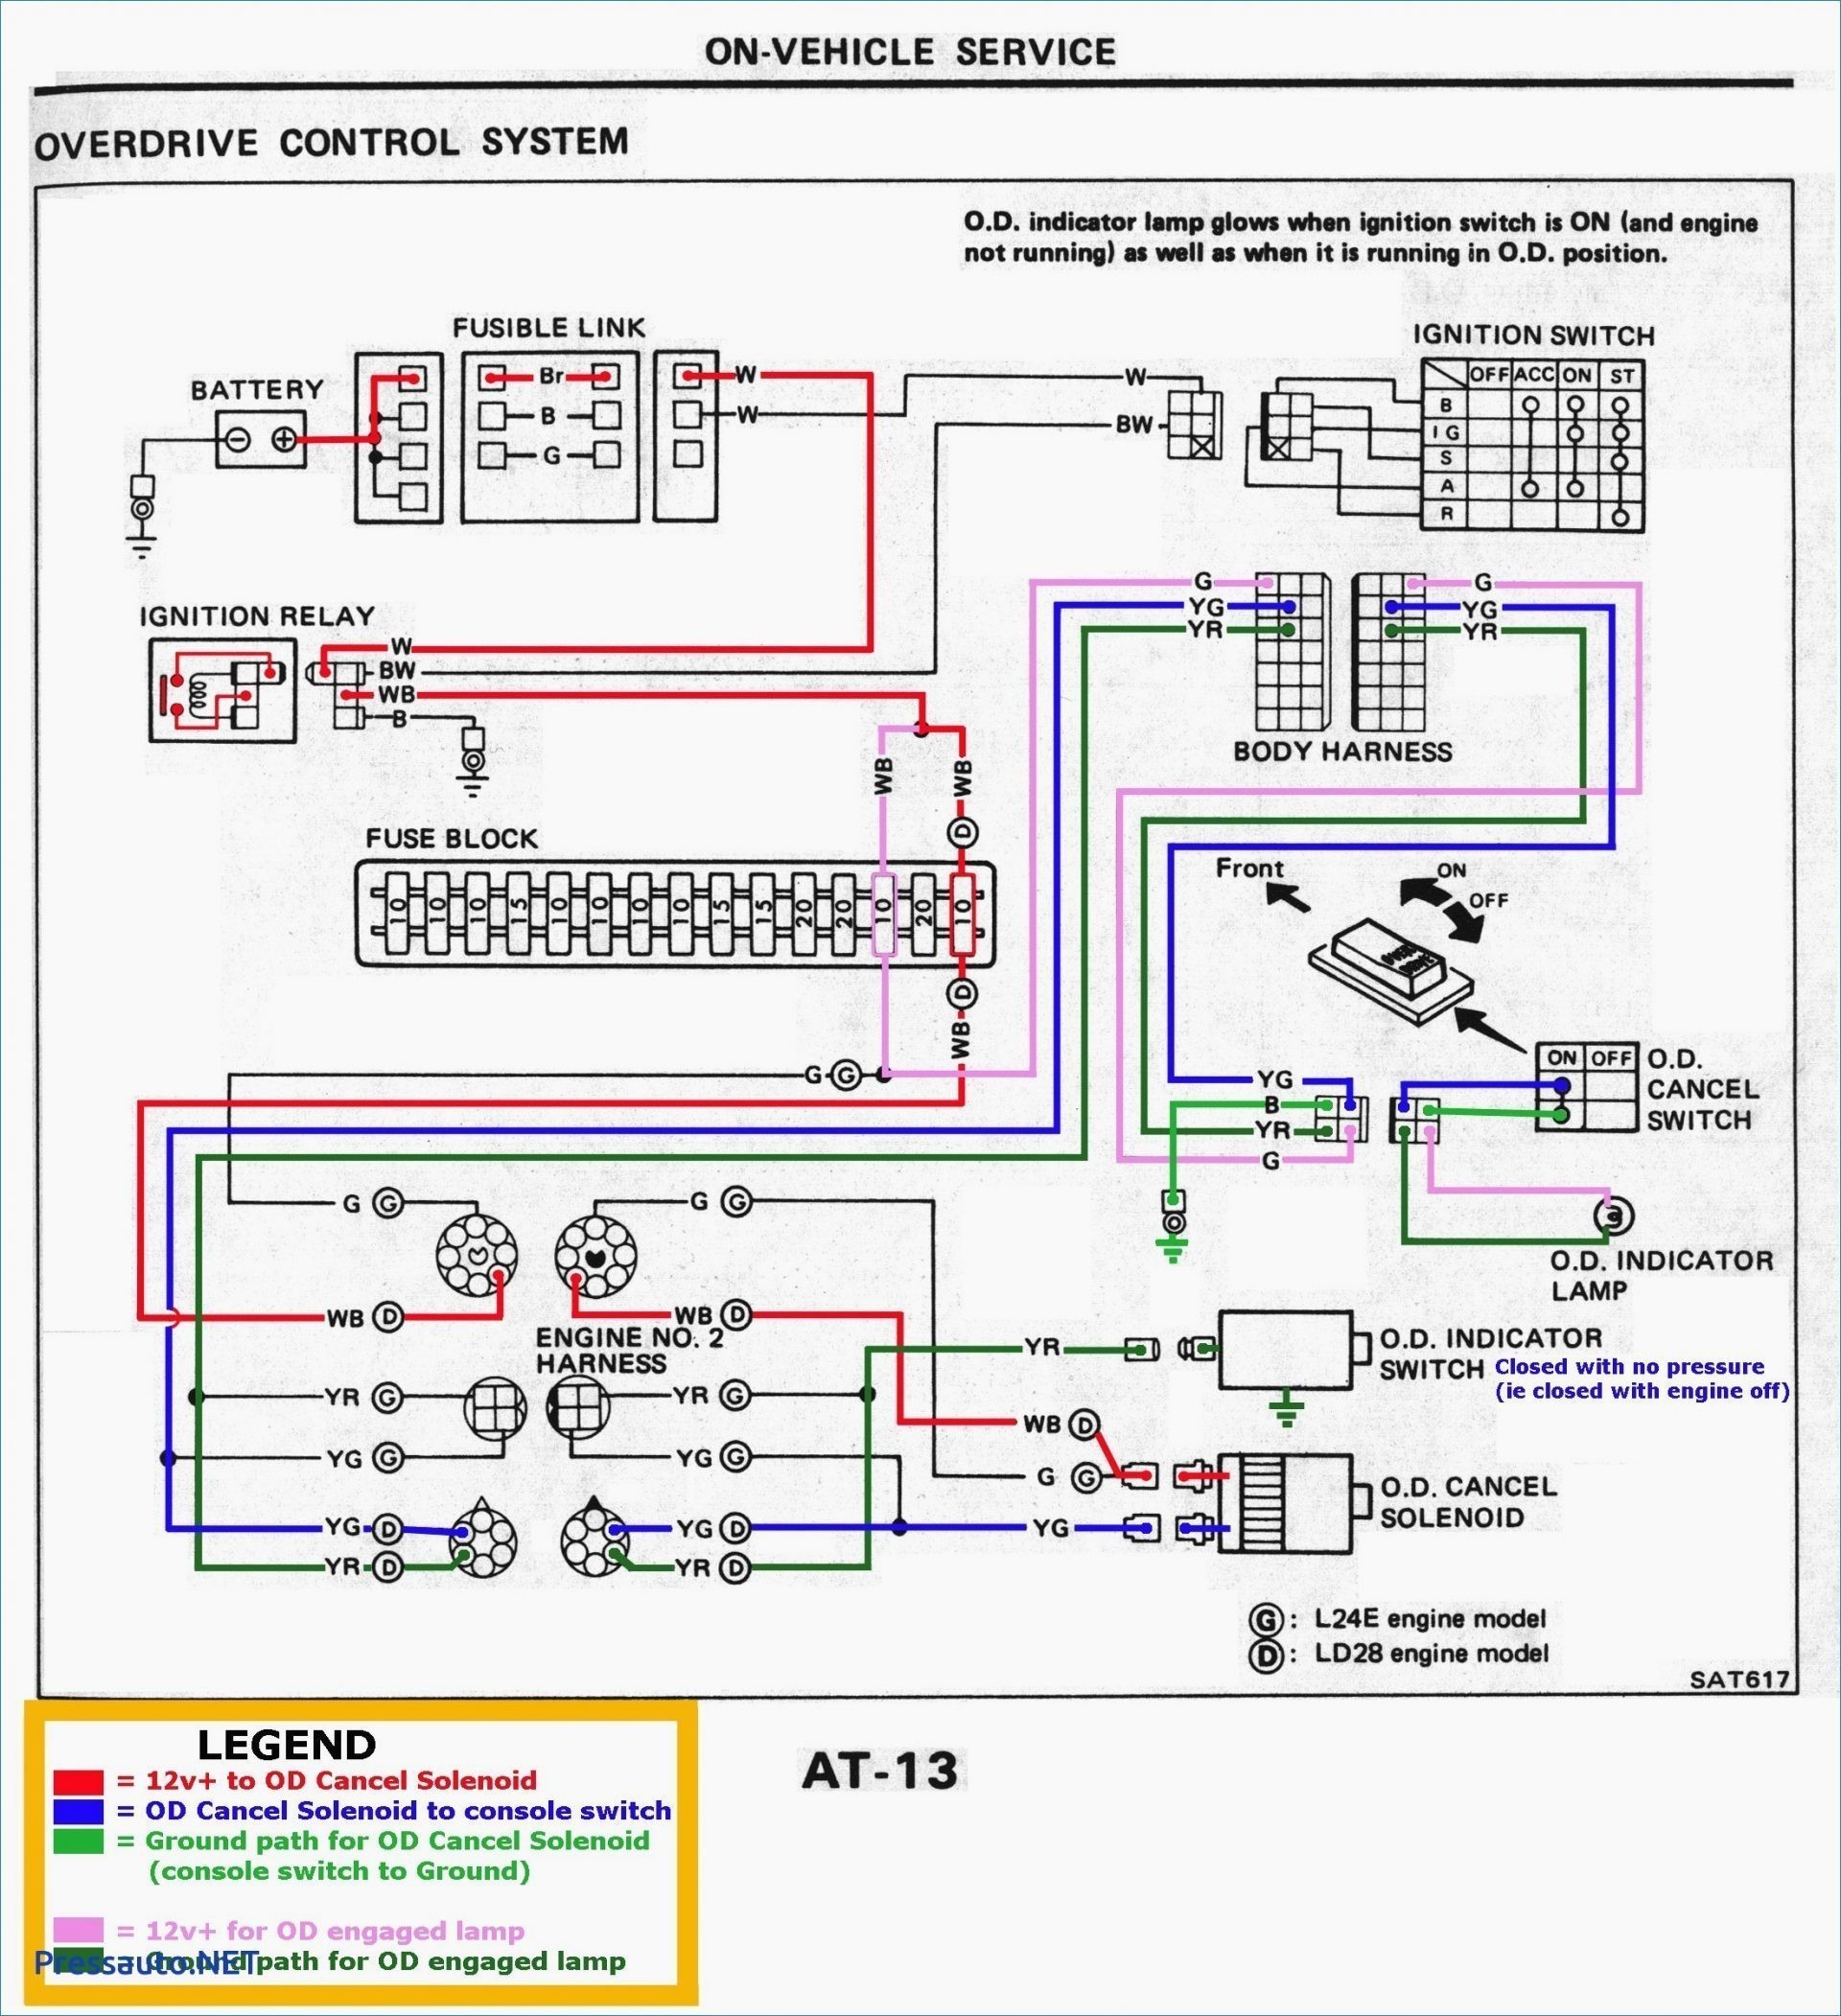 House Wiring Diagram Canada Best House Distribution Board Wiring Diagram Save Basic House Wiring